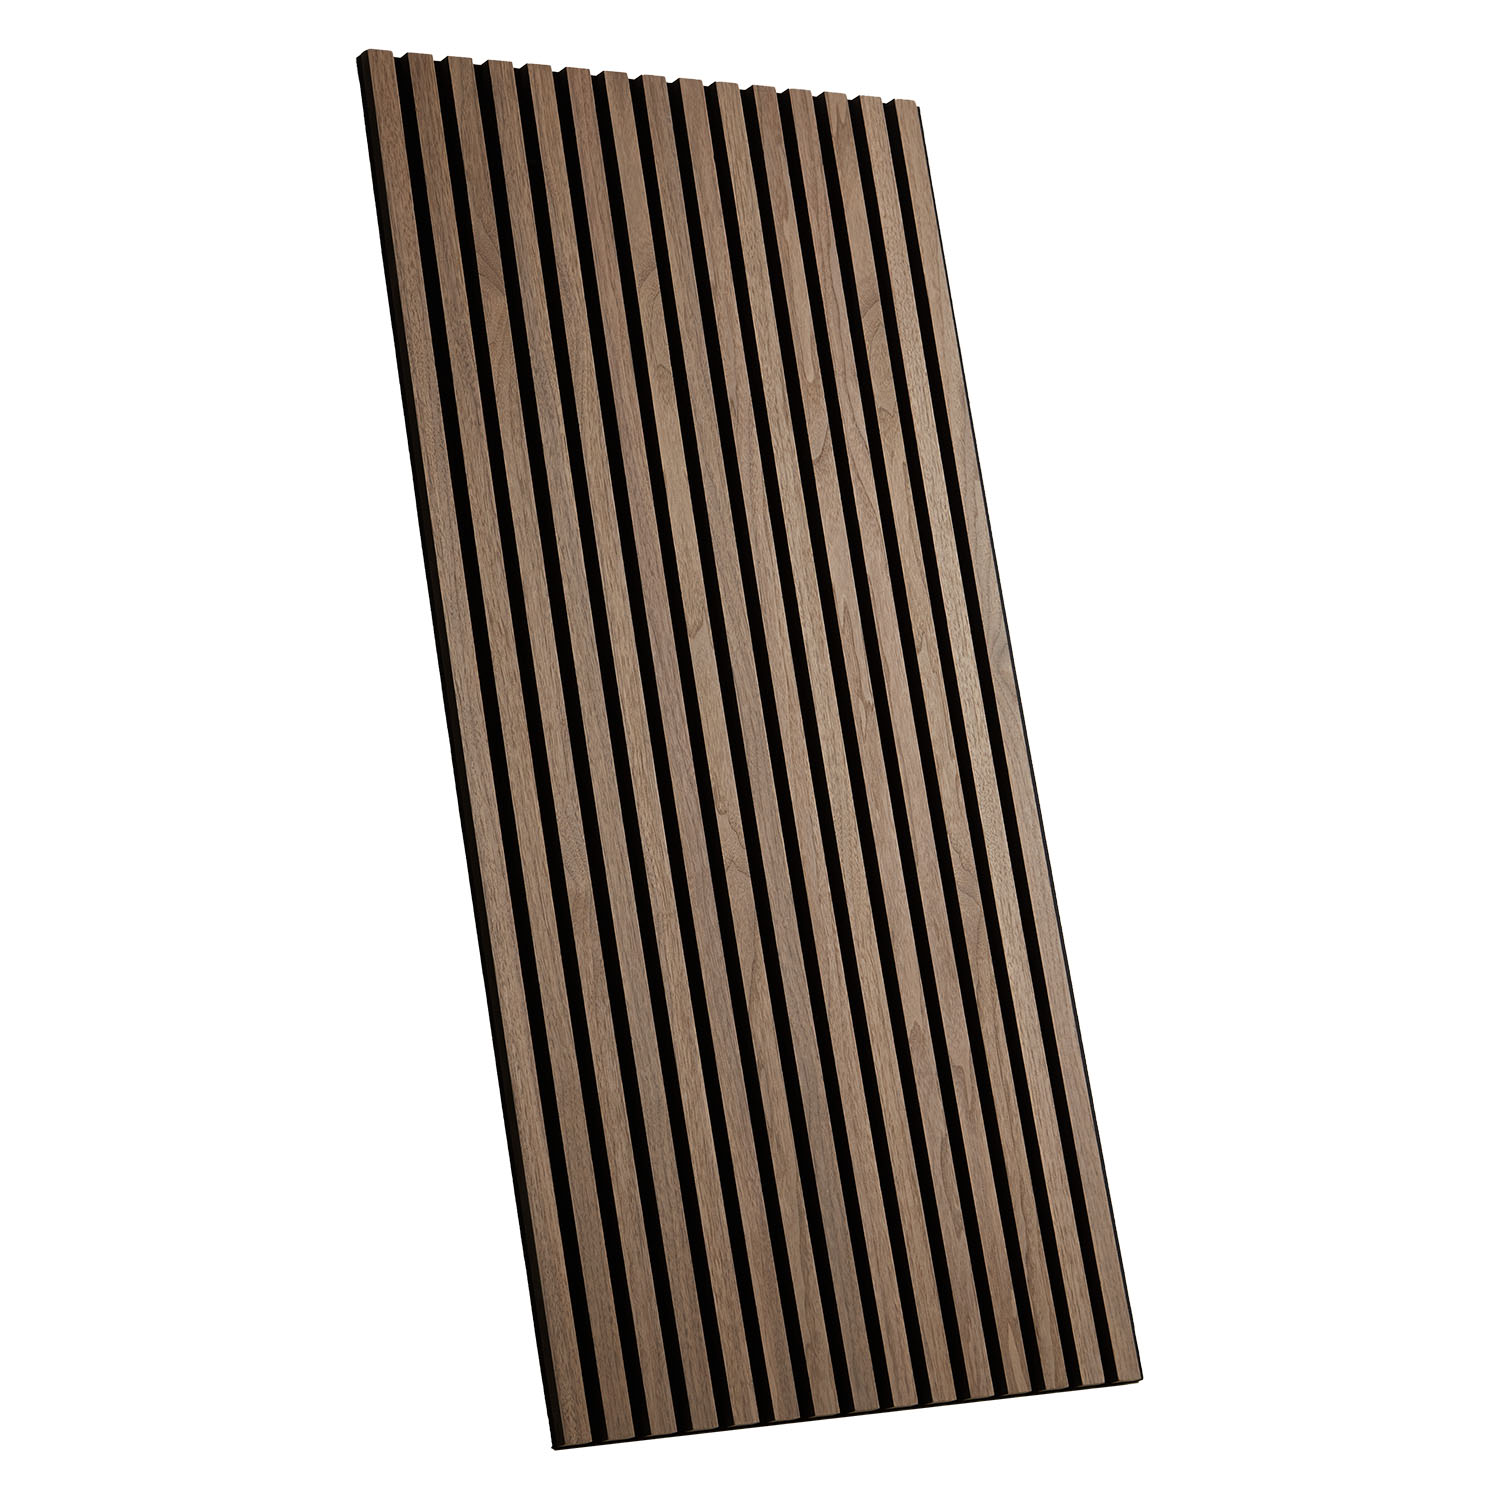 1, 2 or 4 Wall panels 60 x 120 cm Brown Wood paneling for walls Acoustic panels Bedroom paneling Wall cladding Acoustic sound panels Sound proof panels